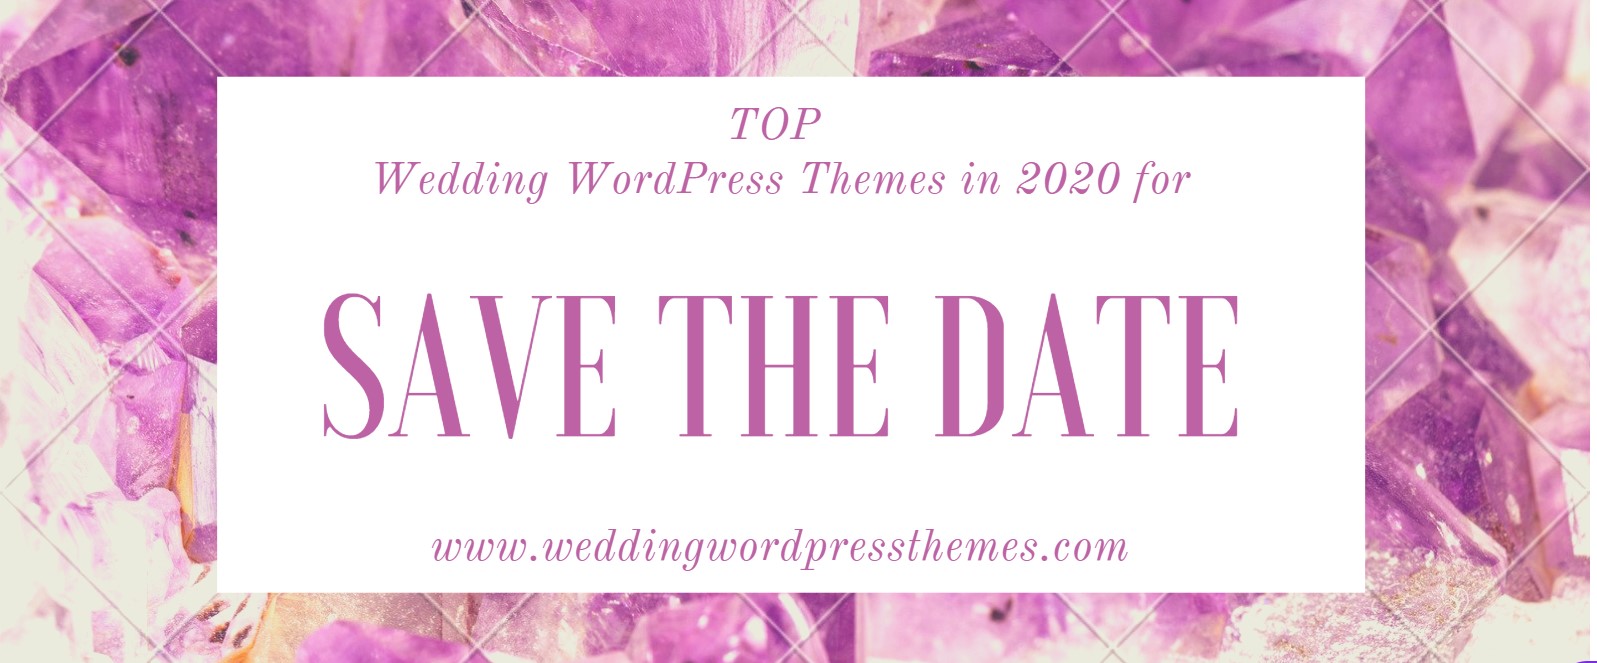 Top Save the Date Wedding WordPress Themes in 2020